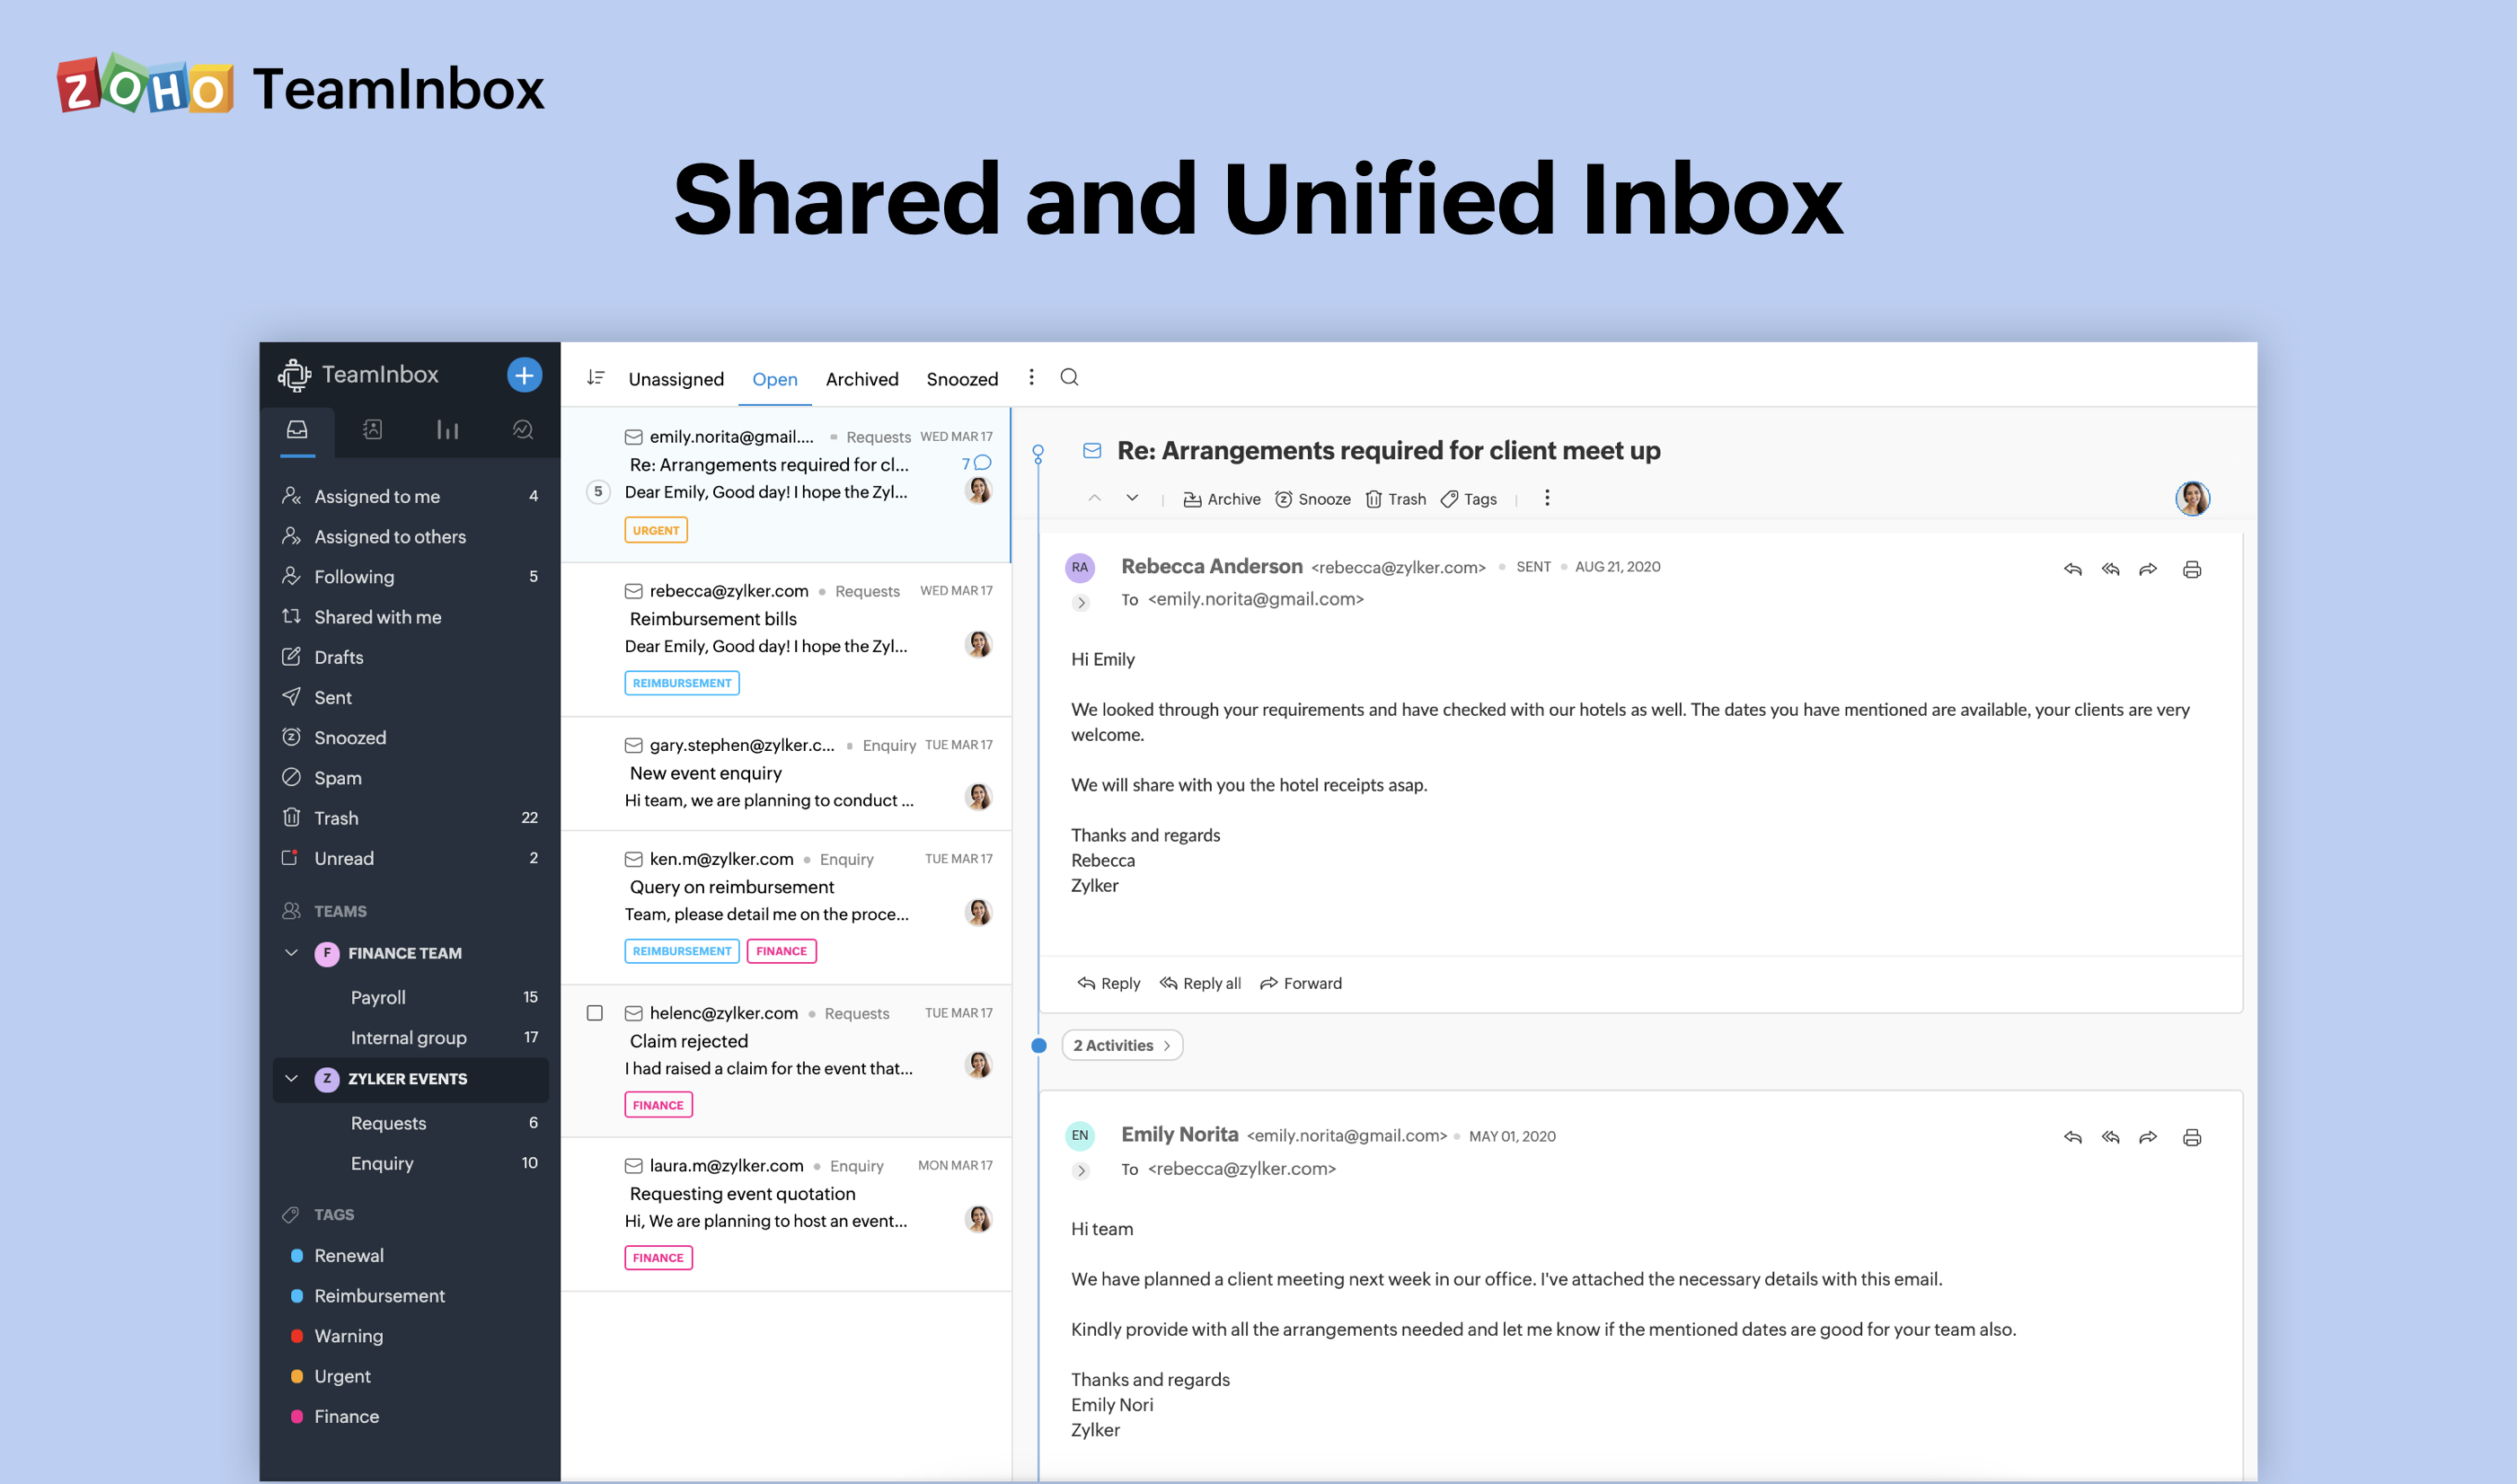 Zoho TeamInbox shared and unified inbox